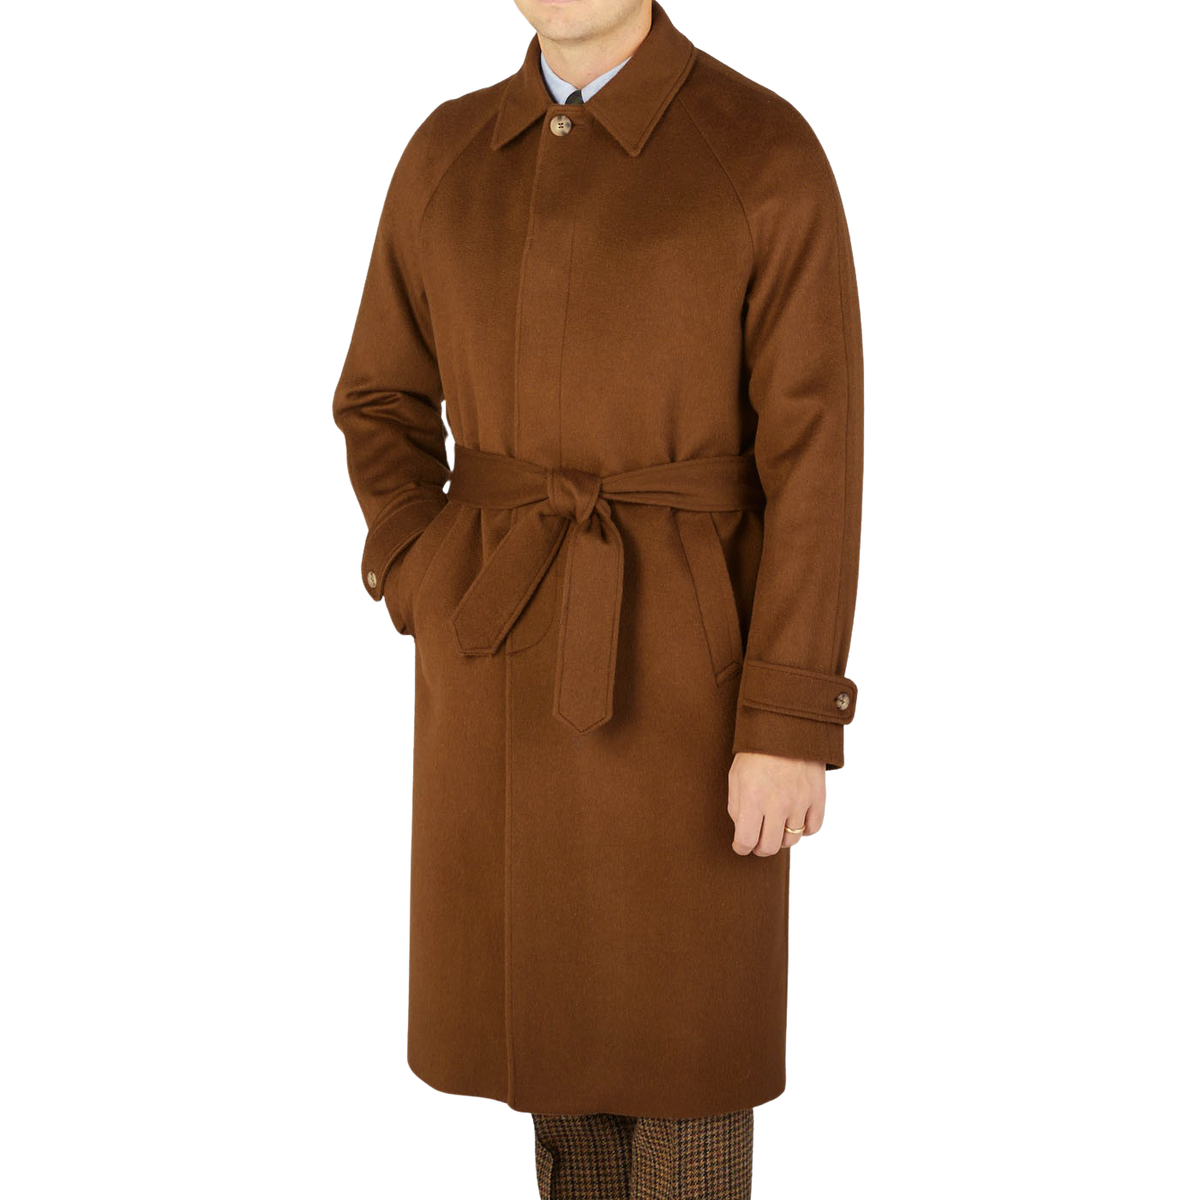 A contemporary man with a Studio 73 twist, confidently sporting a Dark Brown Camel Wool Cashmere Raglan Coat.